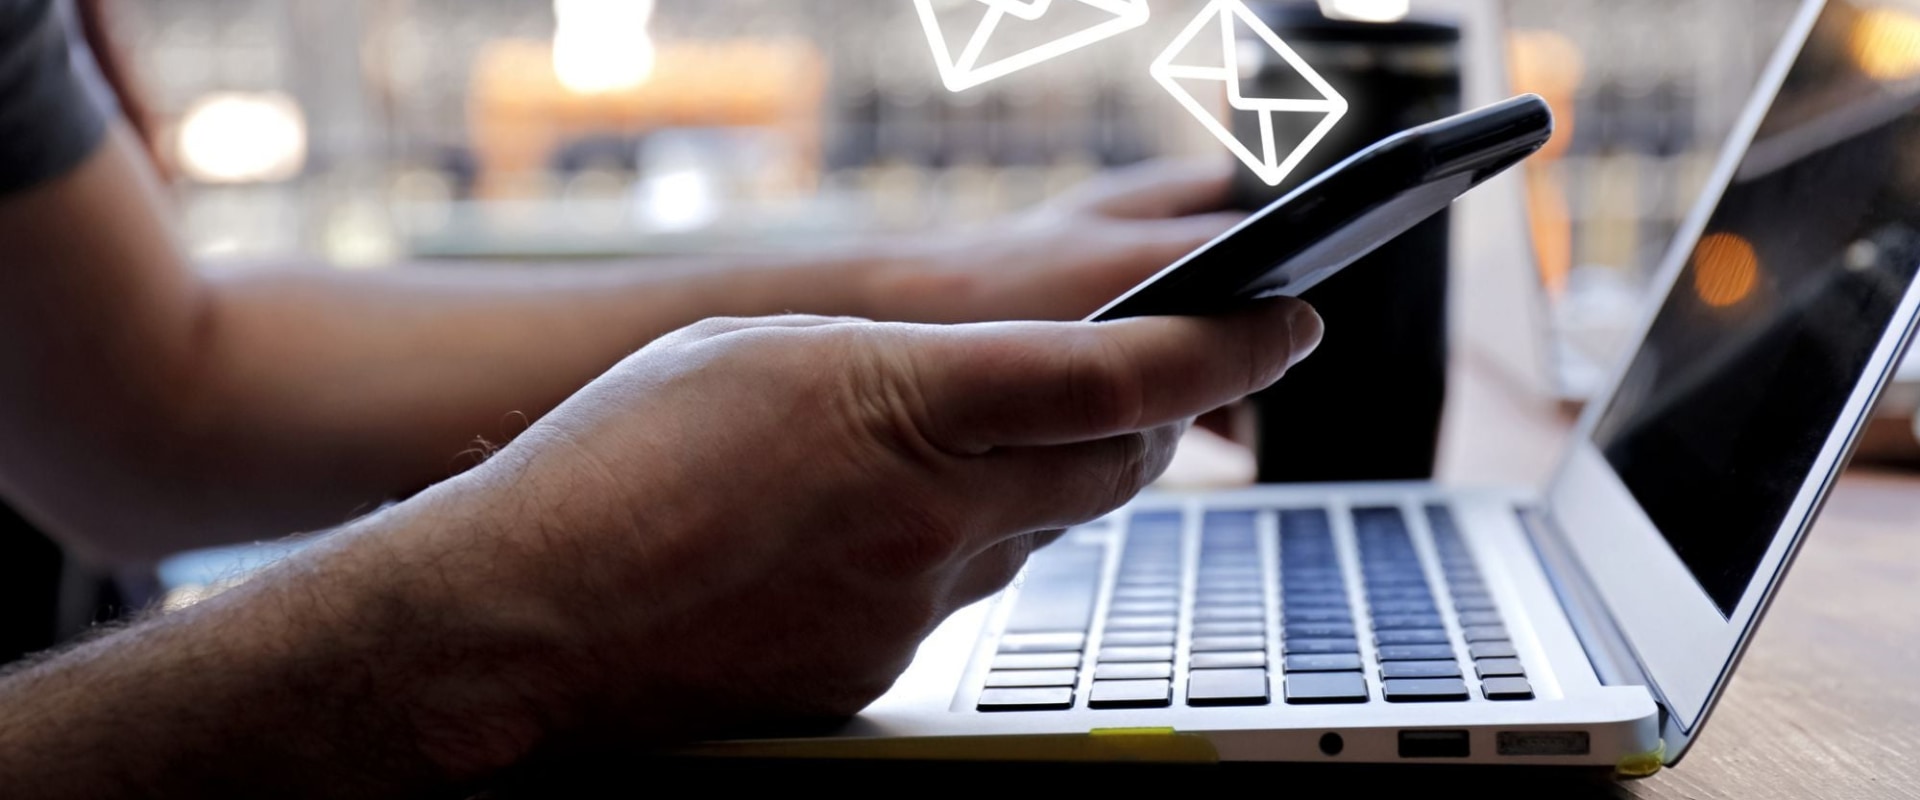 How can i use email marketing to reach my customers?